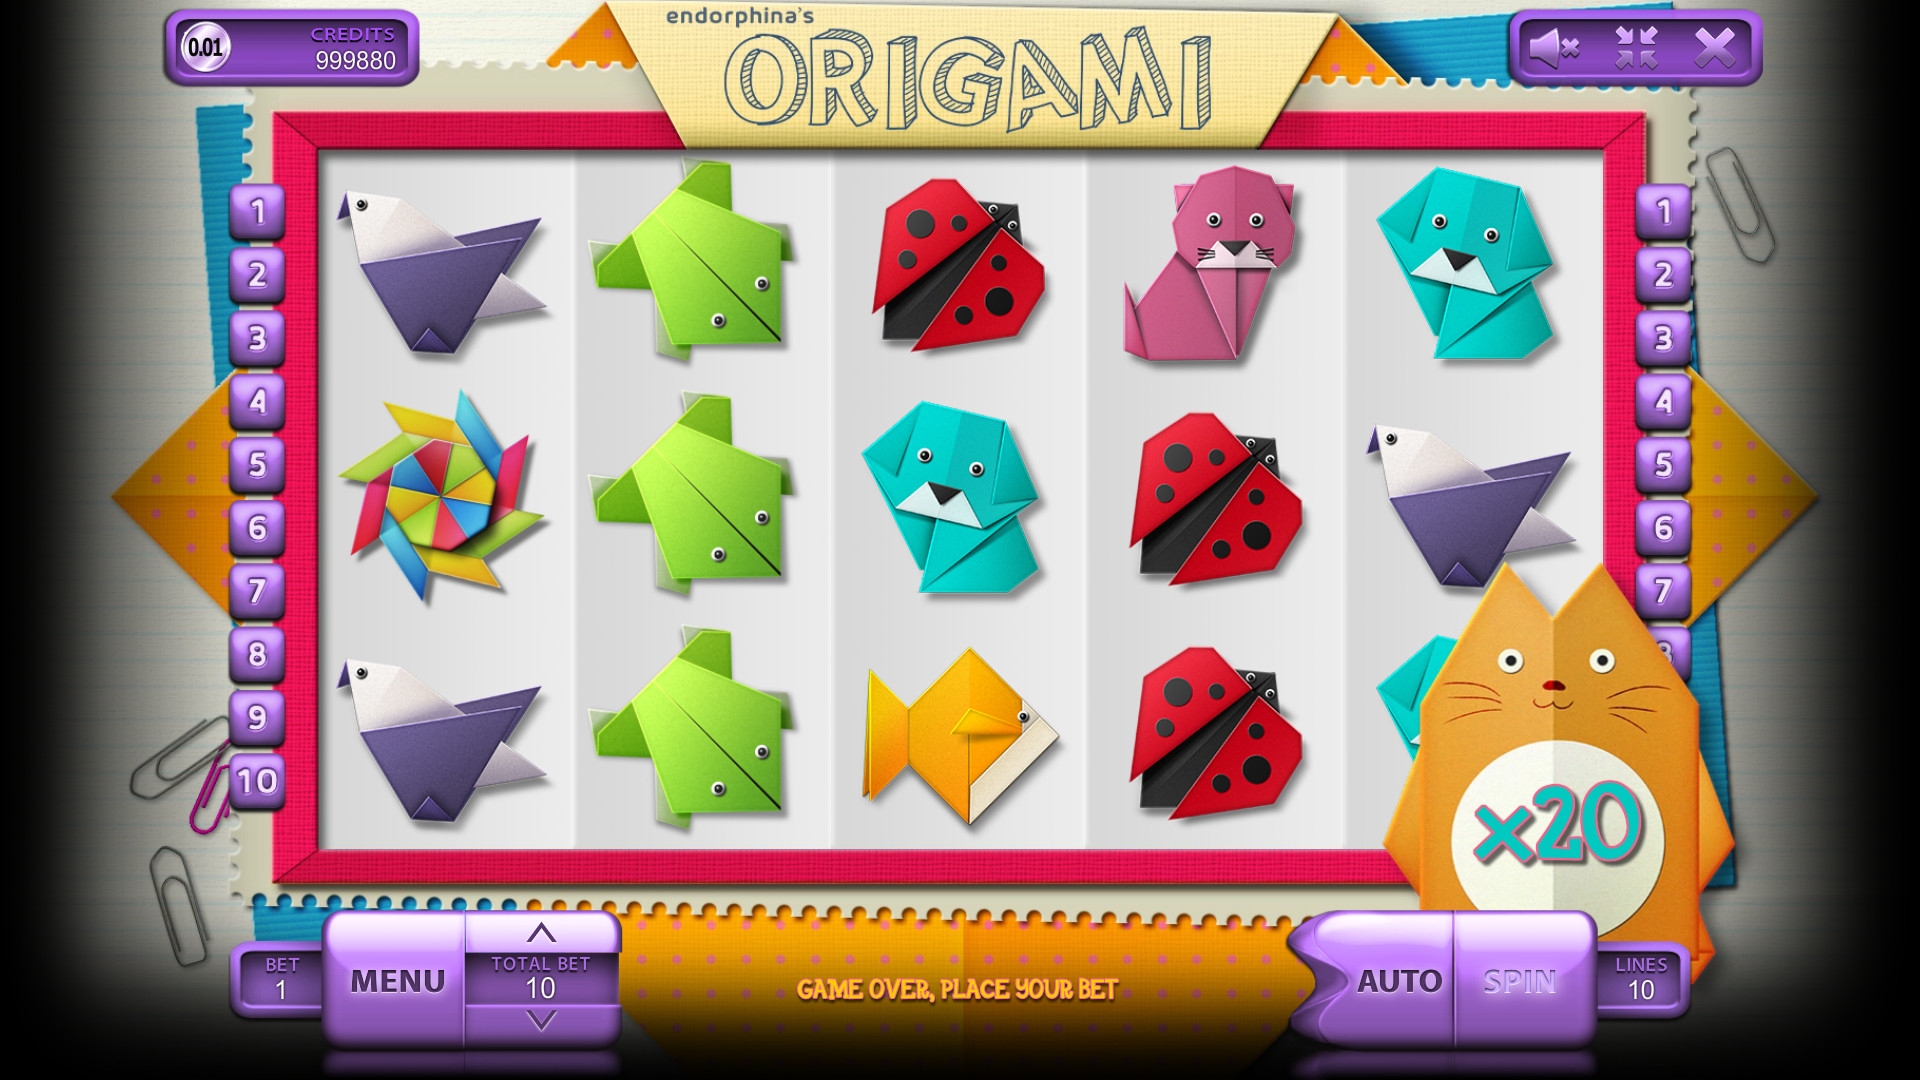 Origami (Origami) from category Slots